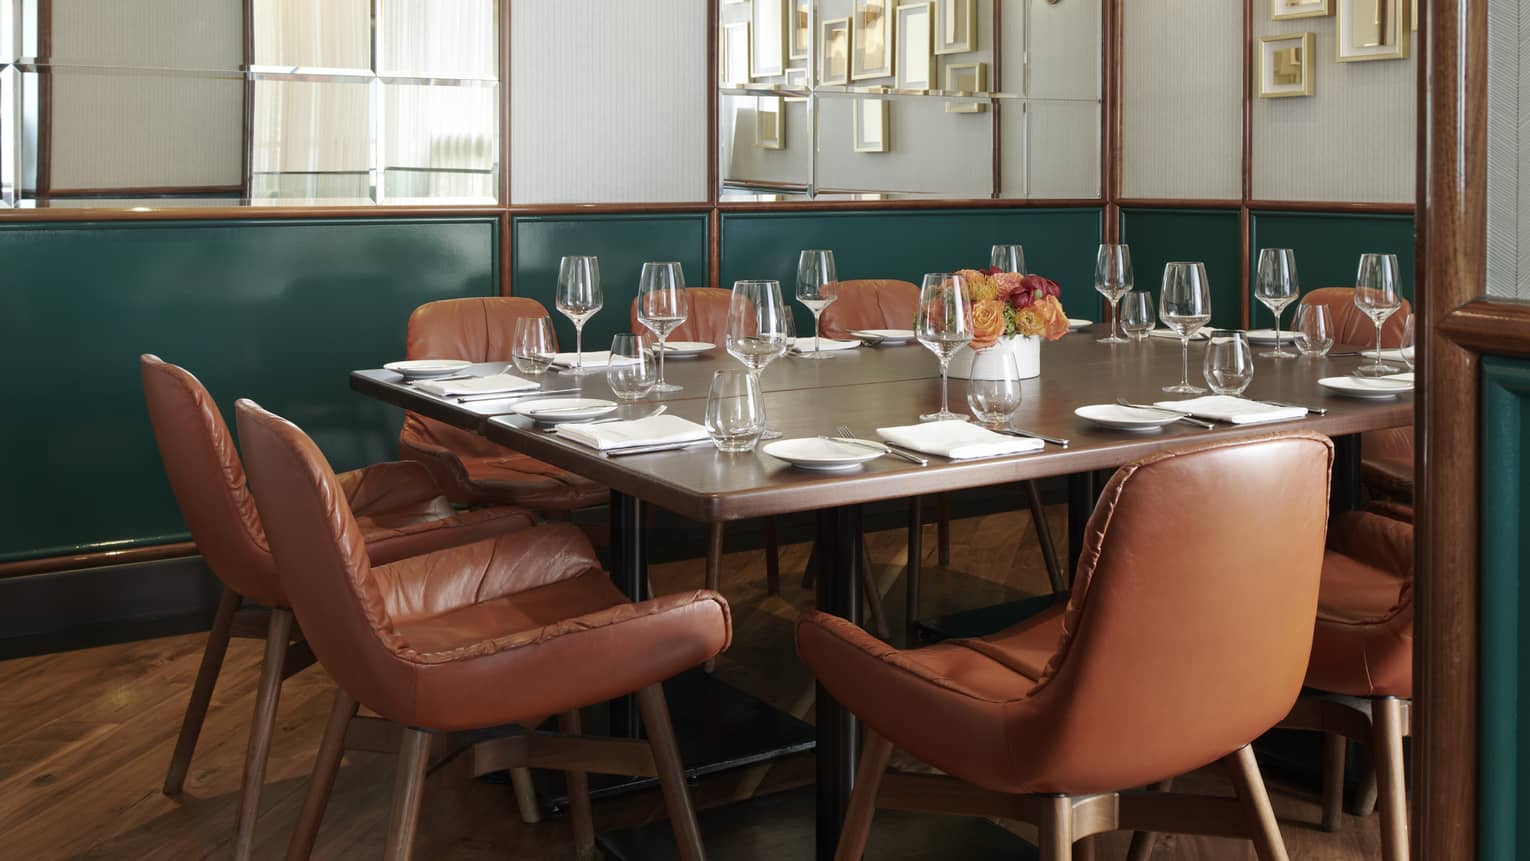 Private dining room with mirrored walls, dark green accents and a rectangular table with brown-leather seats